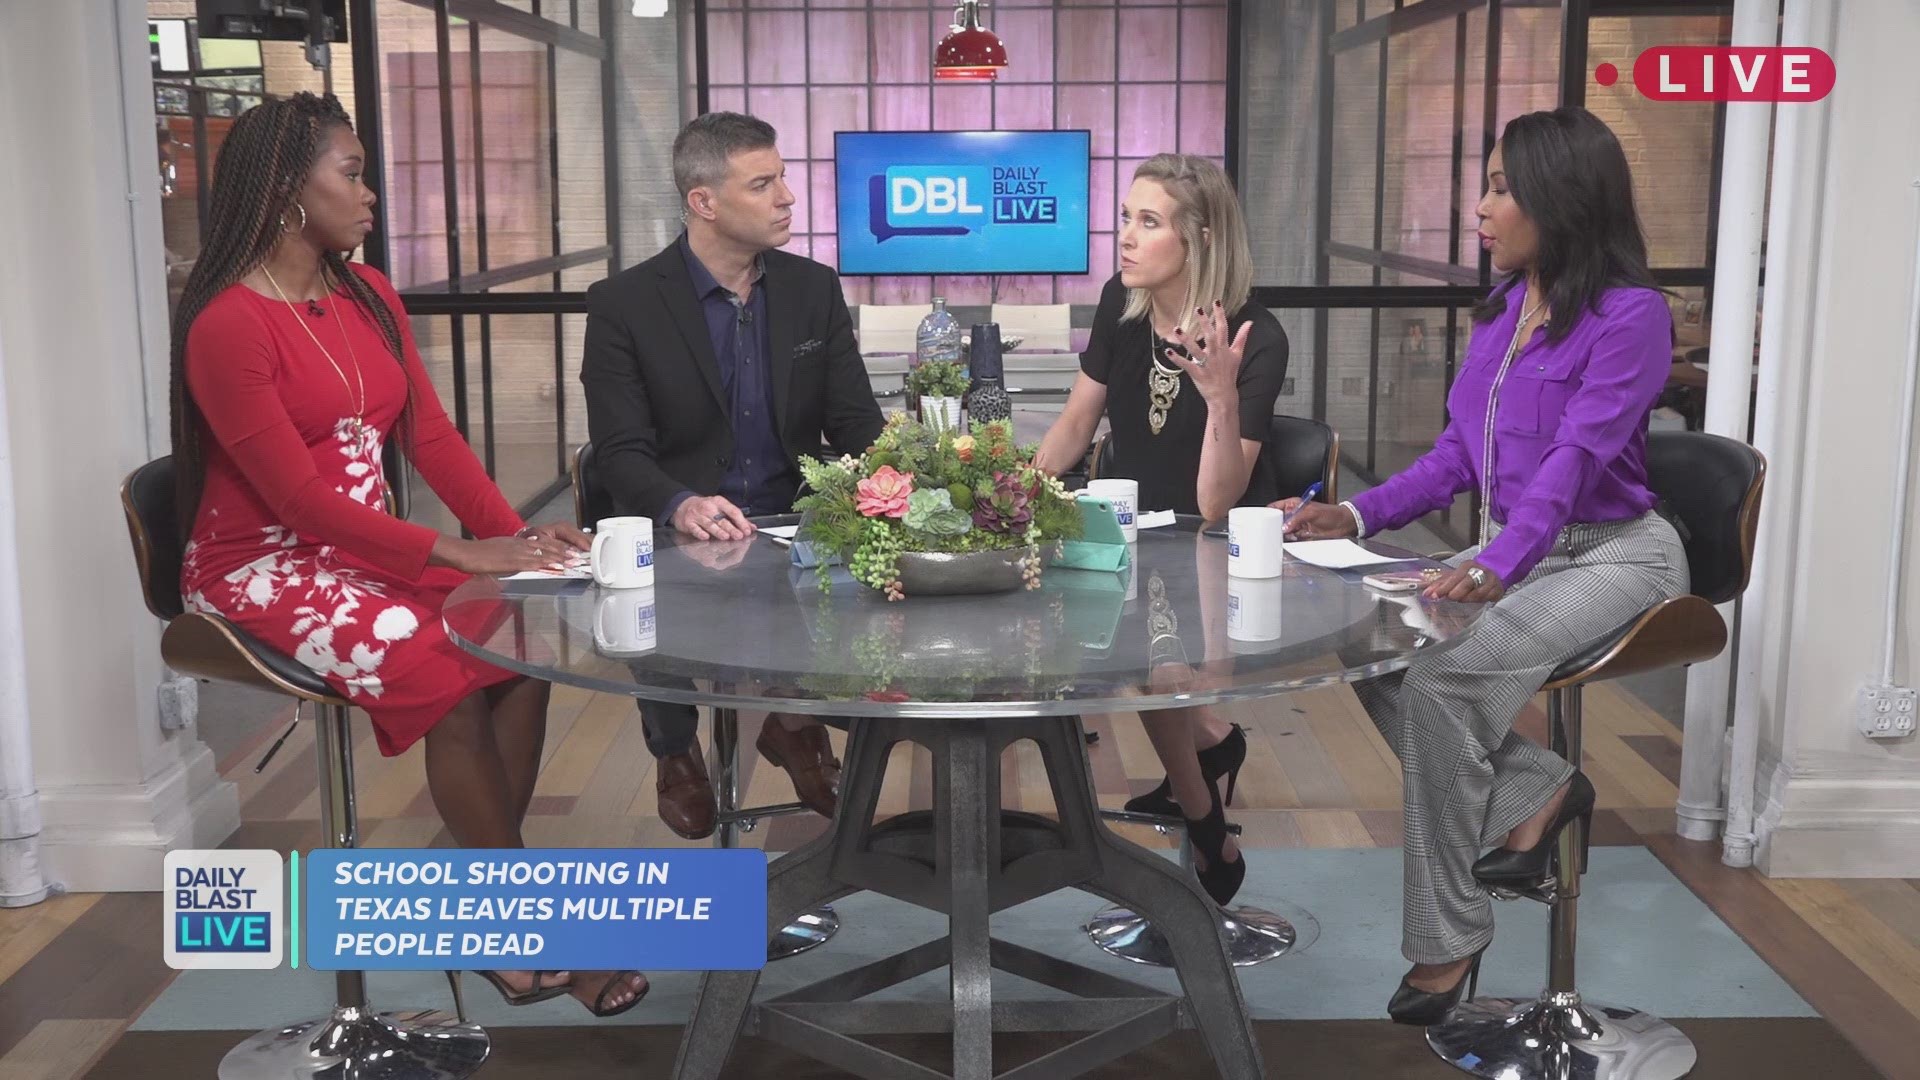 Following the deadly school shooting in Santa Fe, Texas, Daily Blast LIVE's co-hosts discuss the impact of the tragedy and Sam Schacher, a new mom, gives her emotional take on it all. 